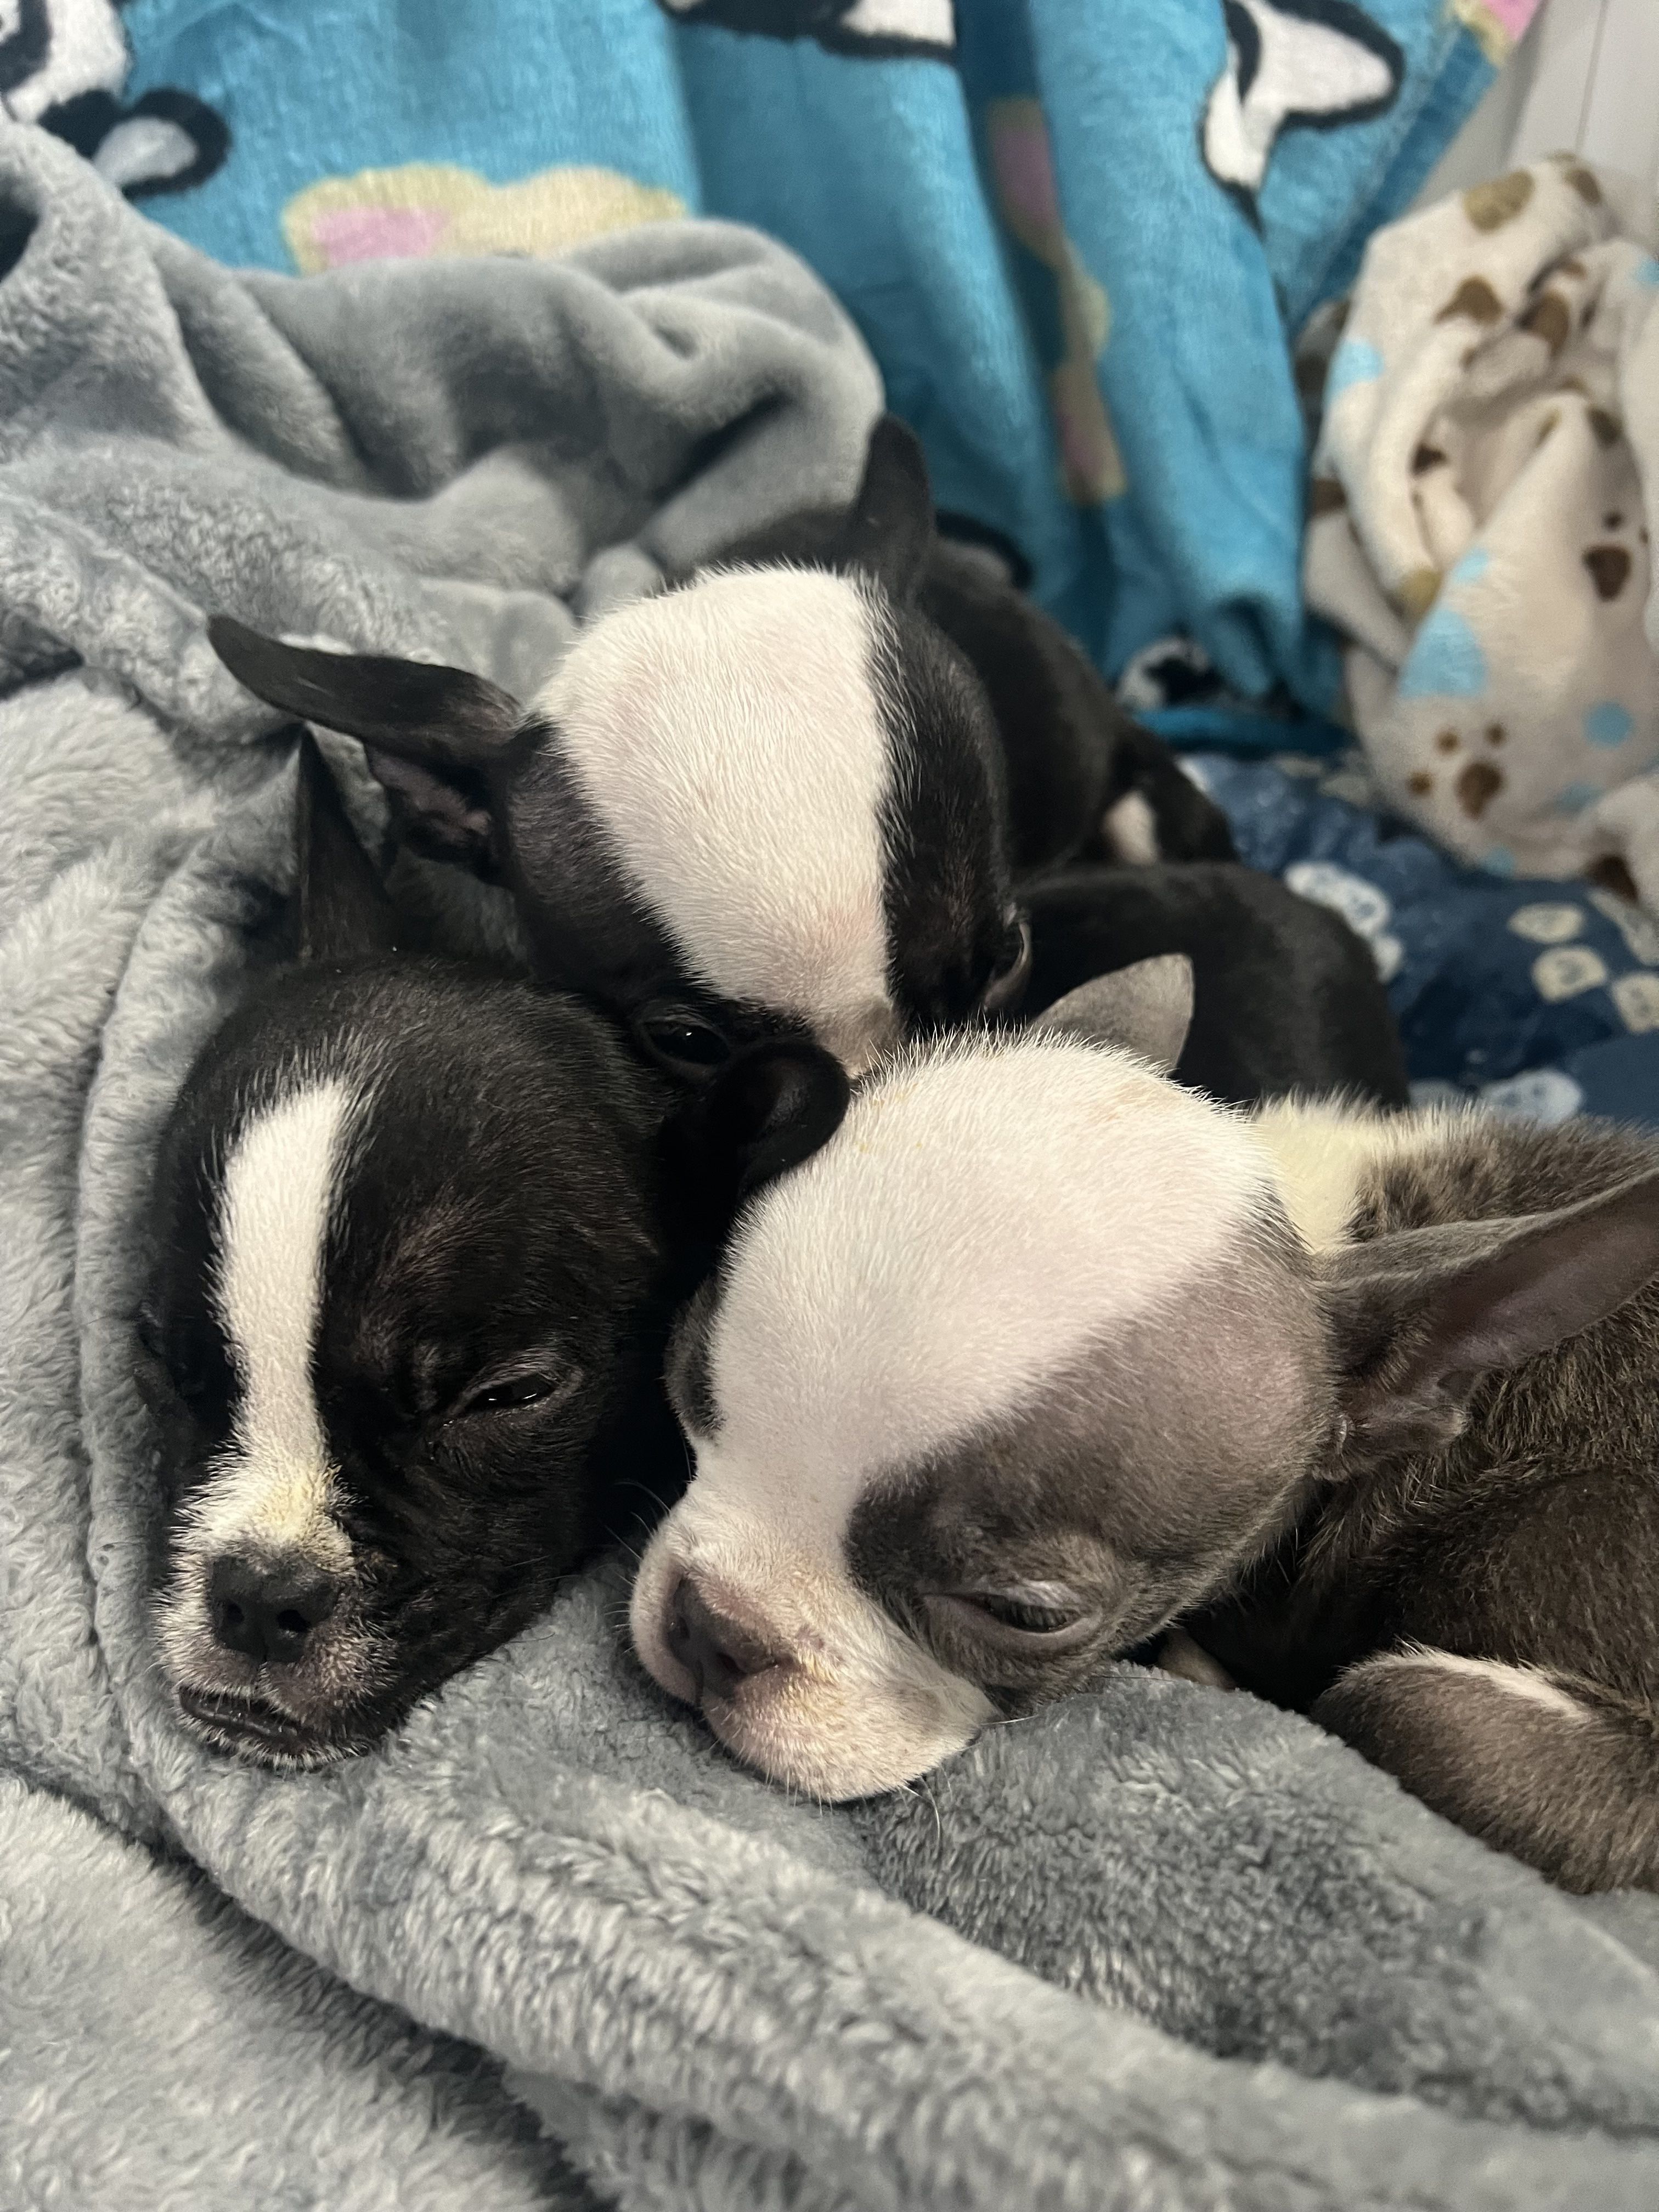 'Cold, sickly, and malnourished' puppies found abandoned outside in North Jersey (NorthJersey.com)